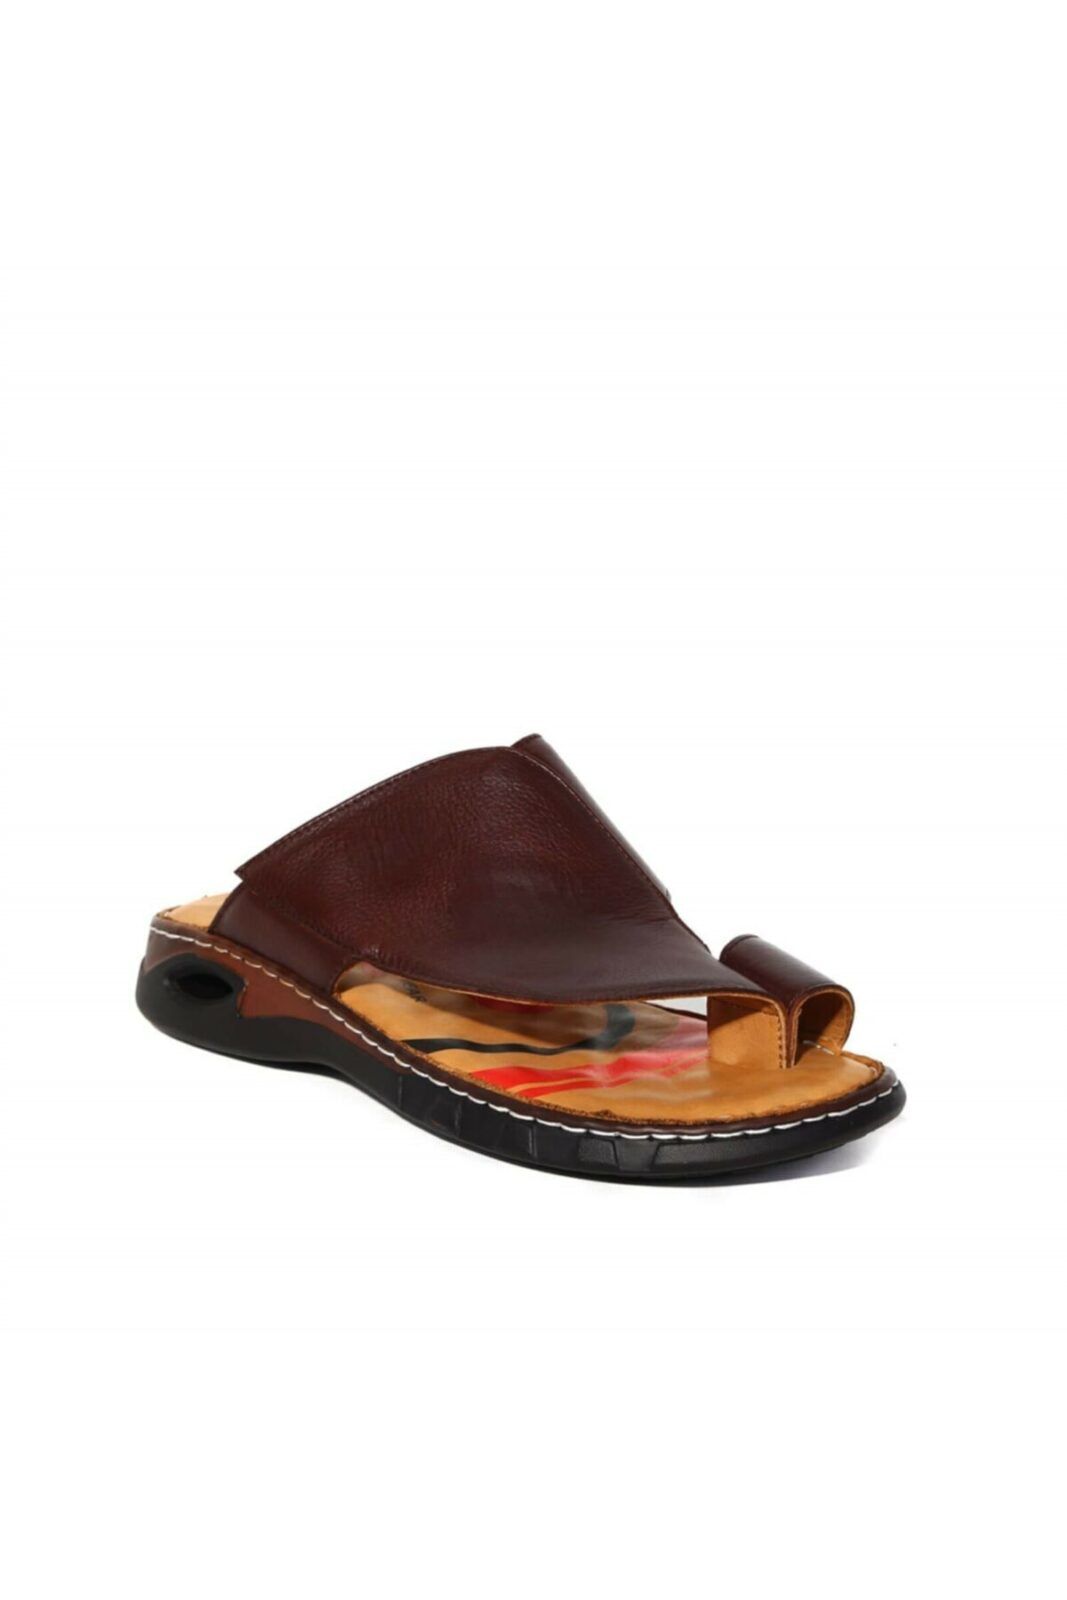 Forelli Mules - Brown